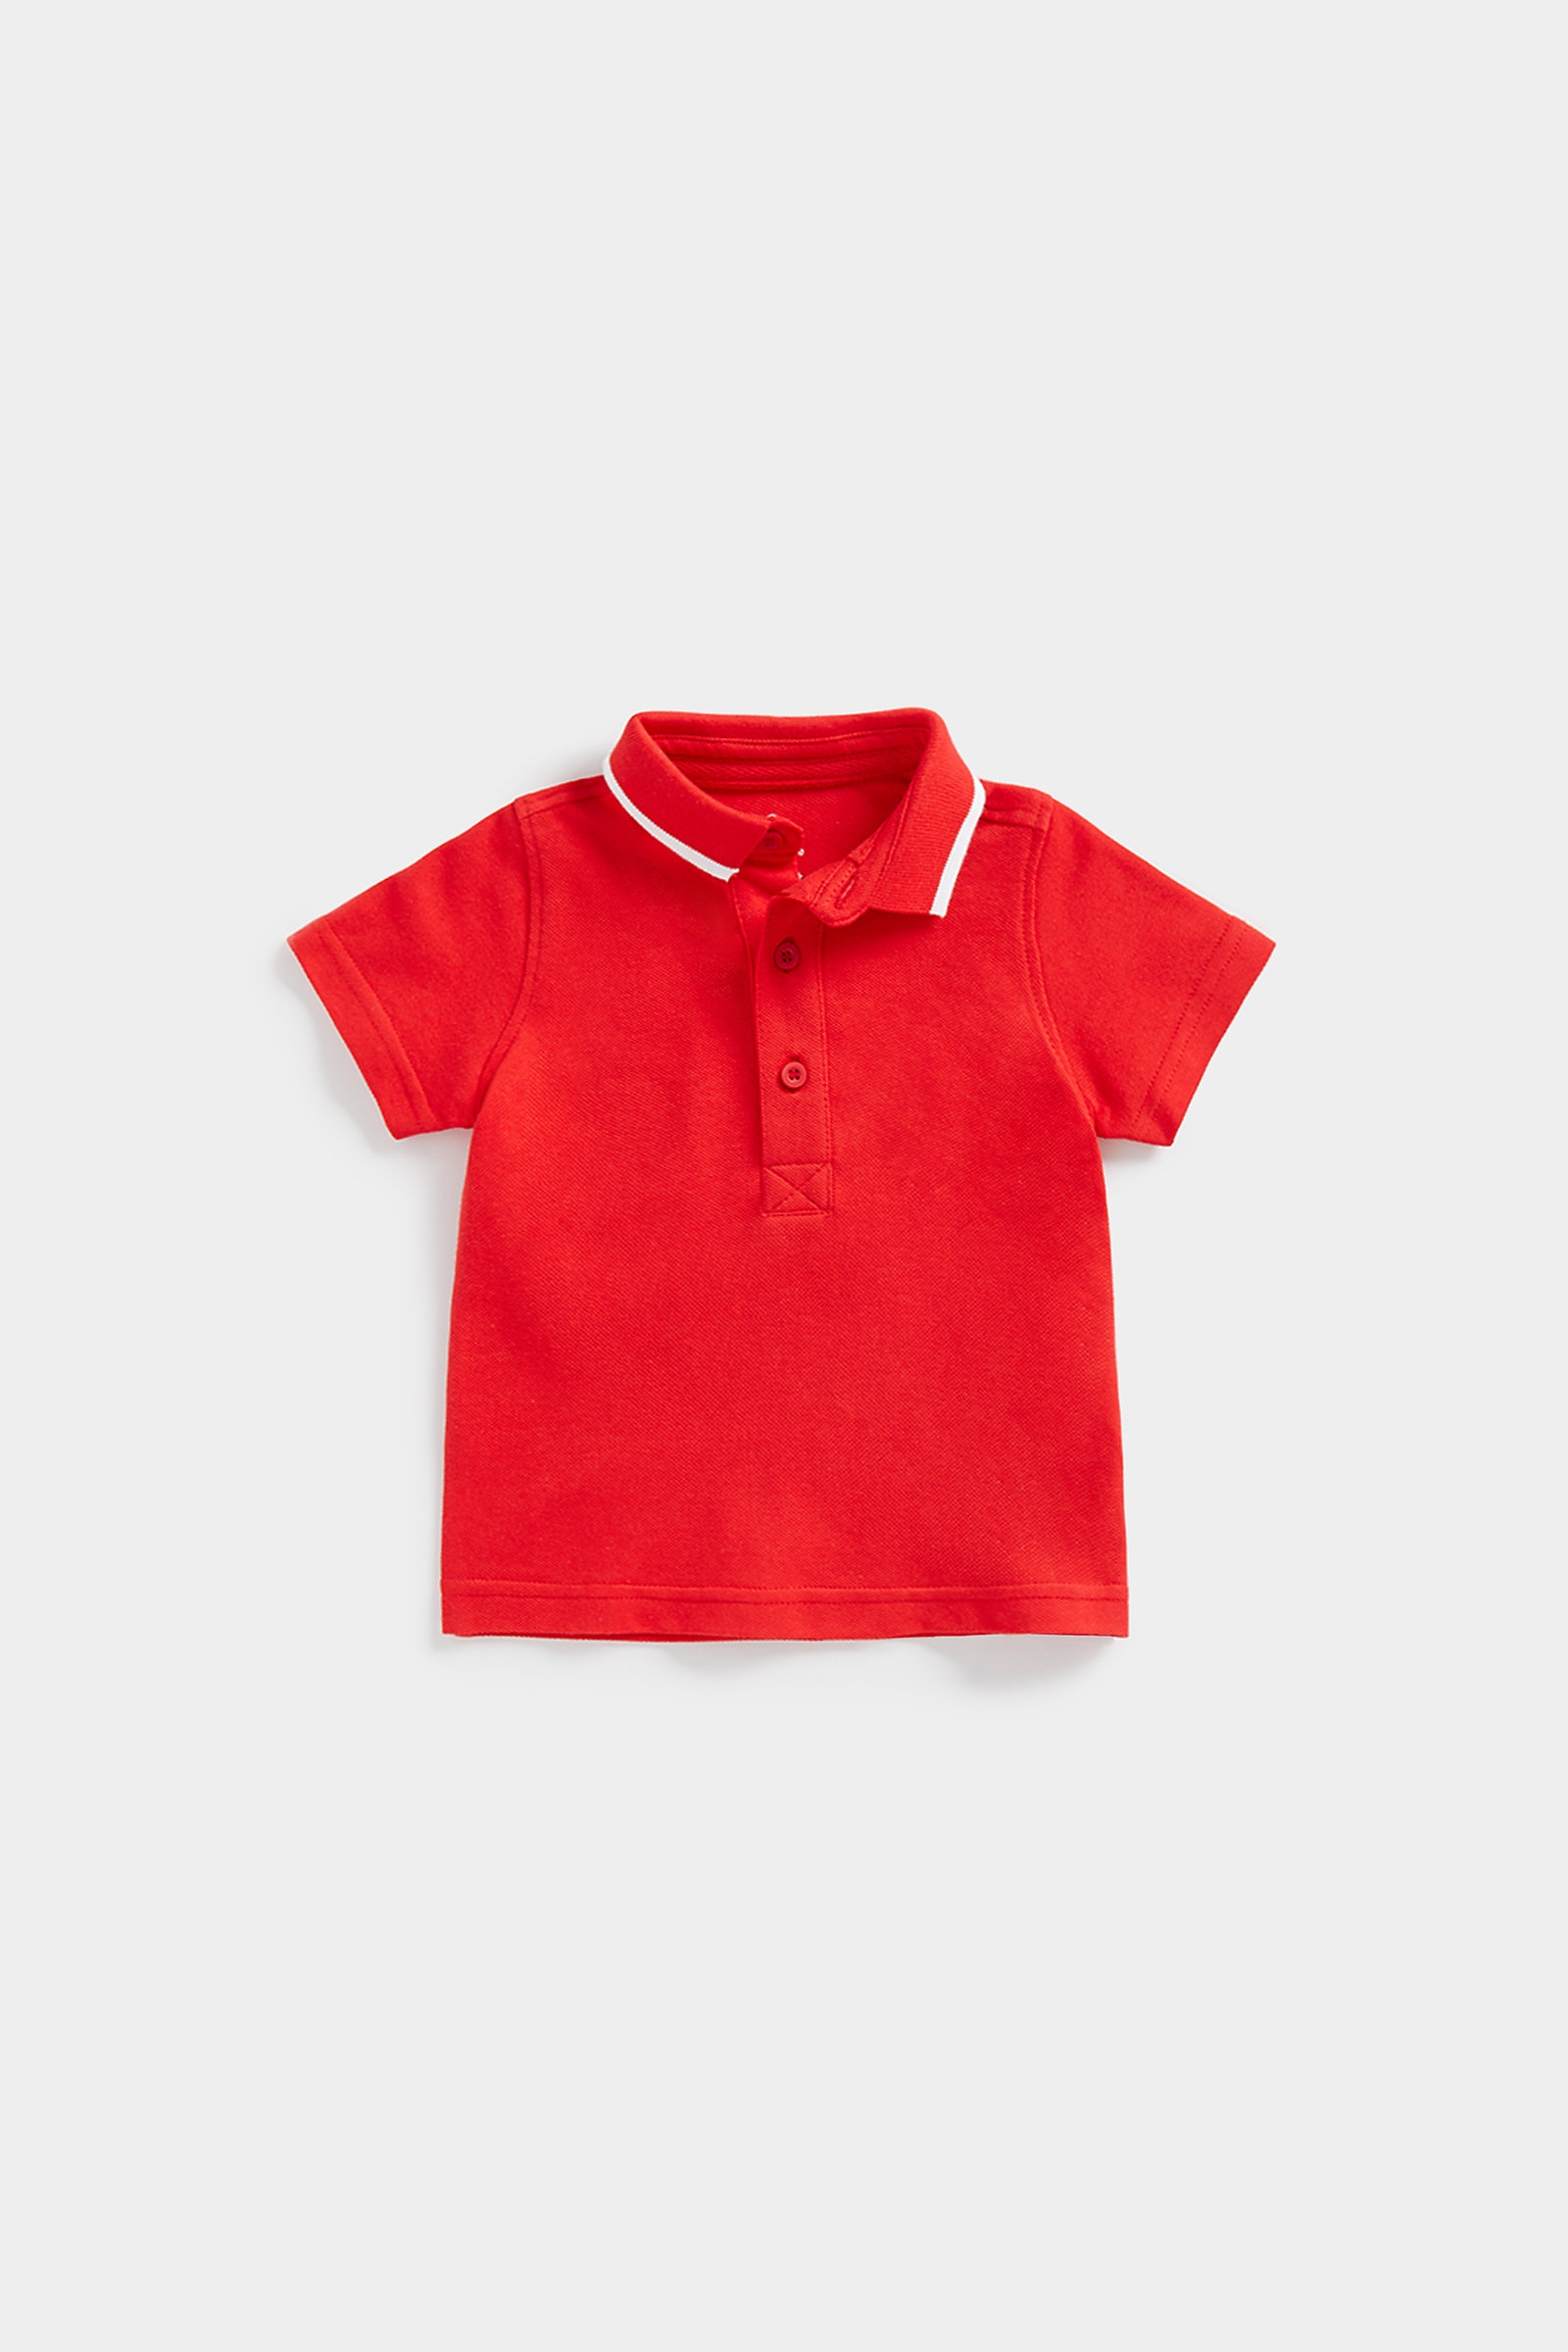 Boys Short Sleeves Polo  -Red